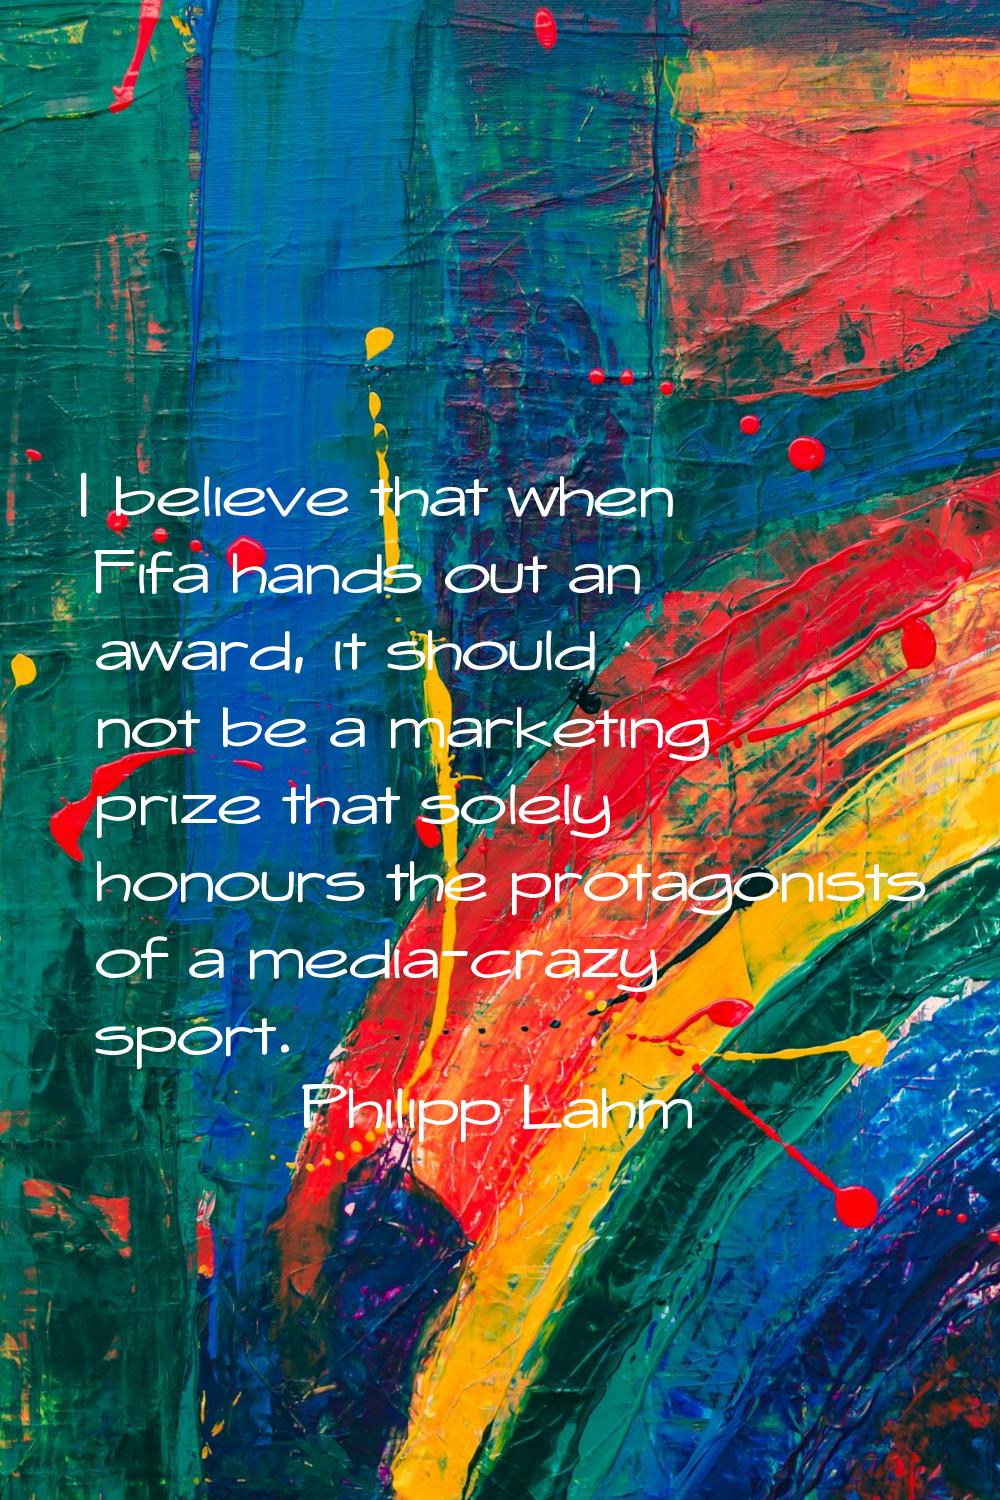 I believe that when Fifa hands out an award, it should not be a marketing prize that solely honours